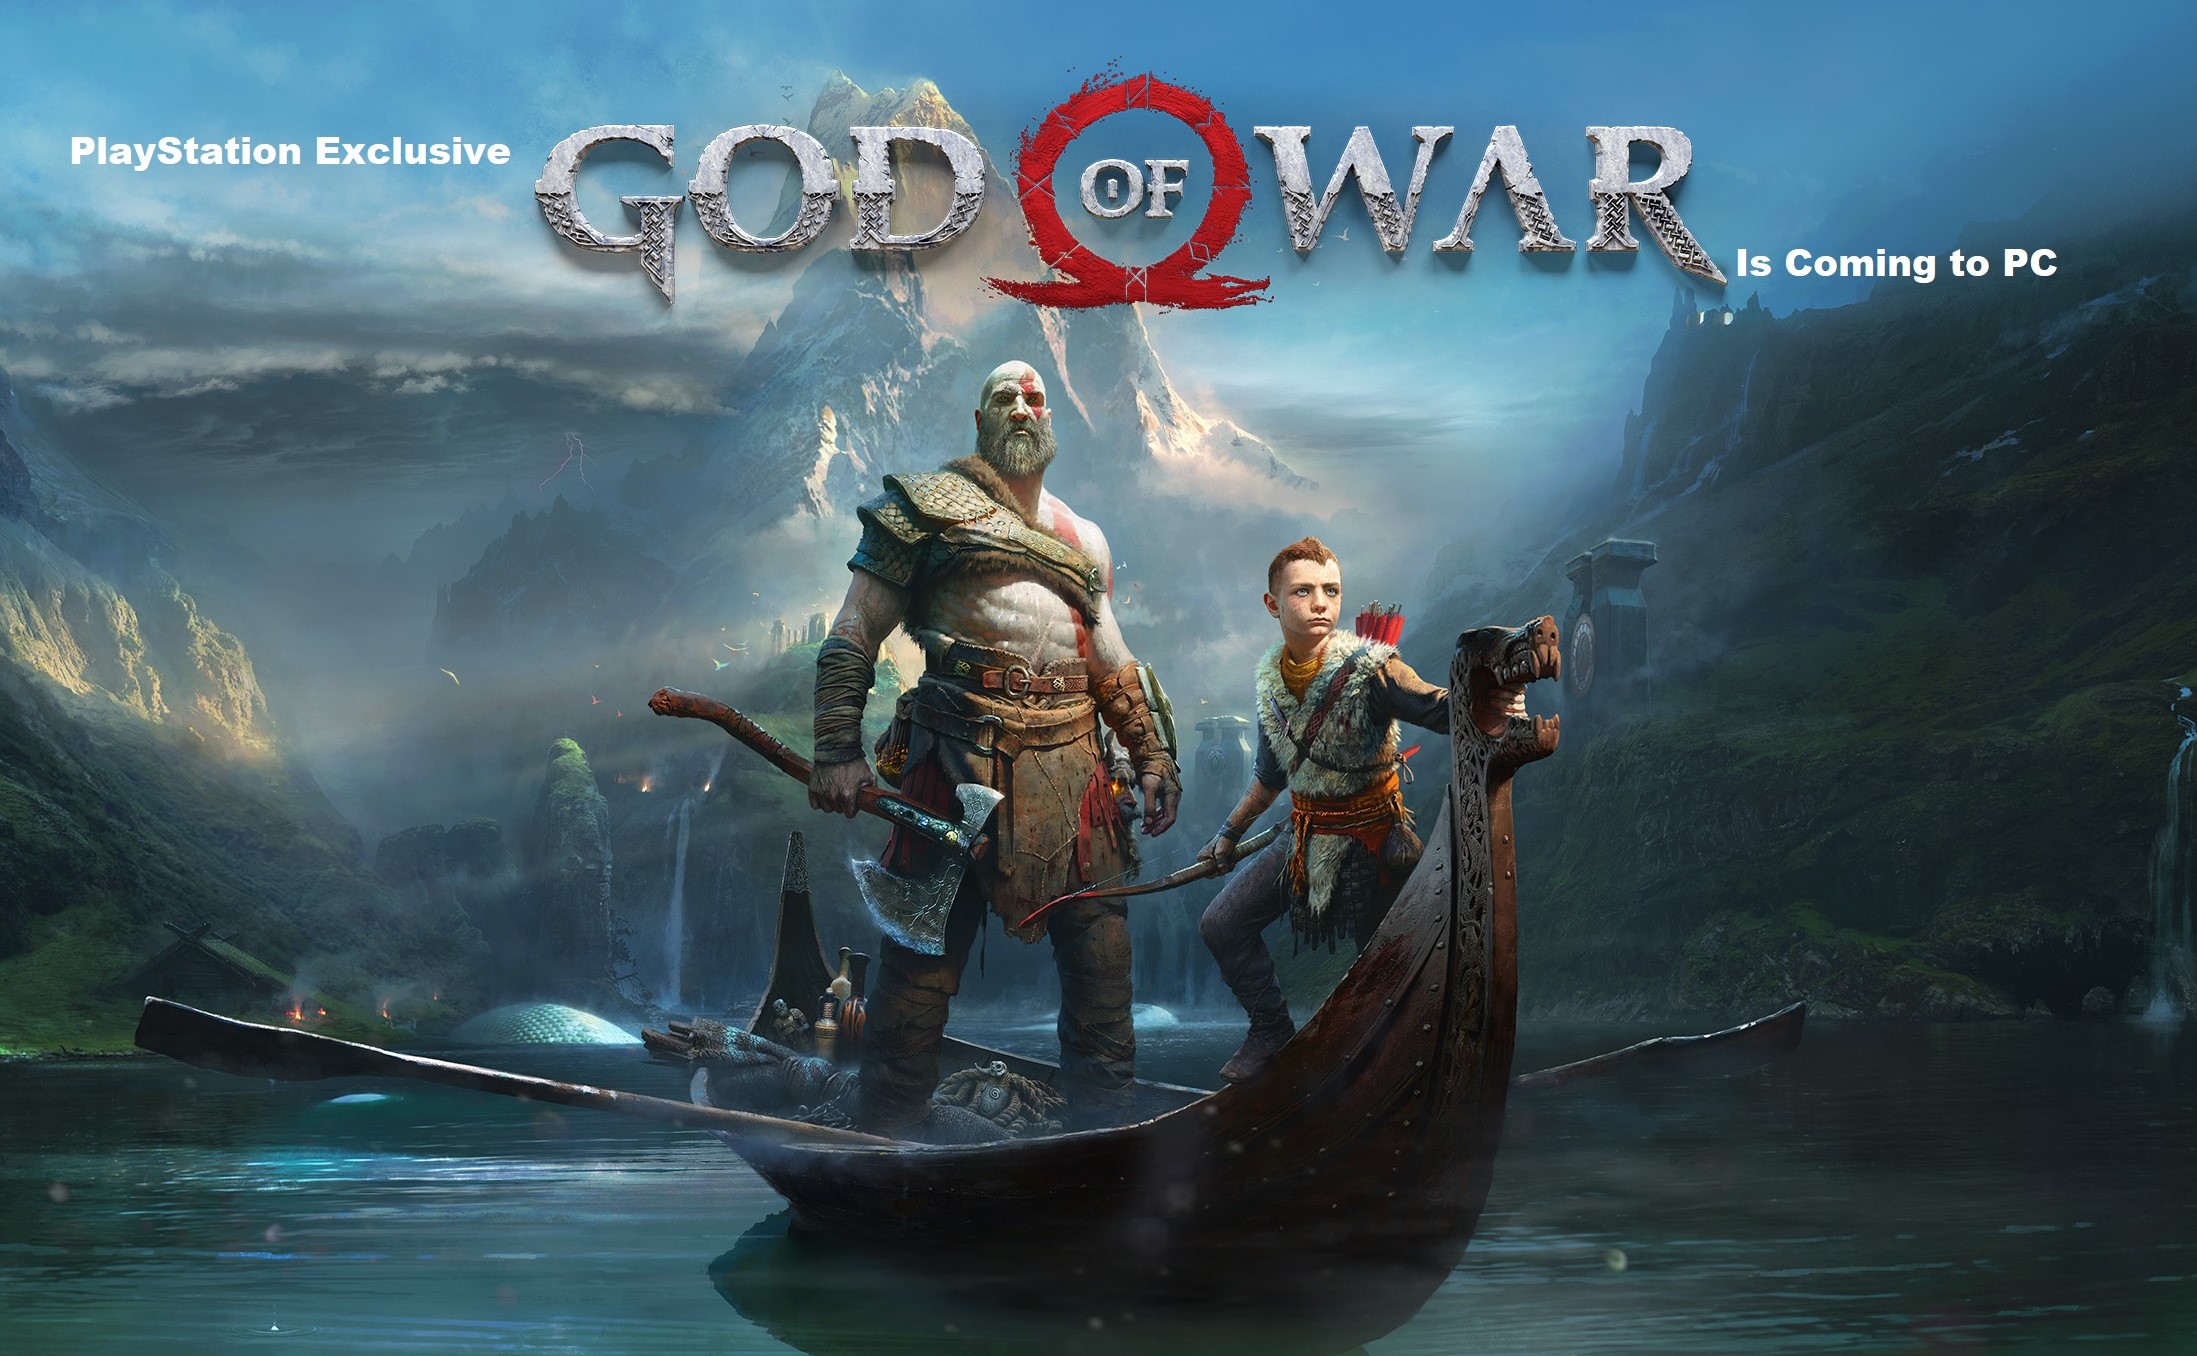 PlayStation Exclusive “God of War” Is Coming to PC 